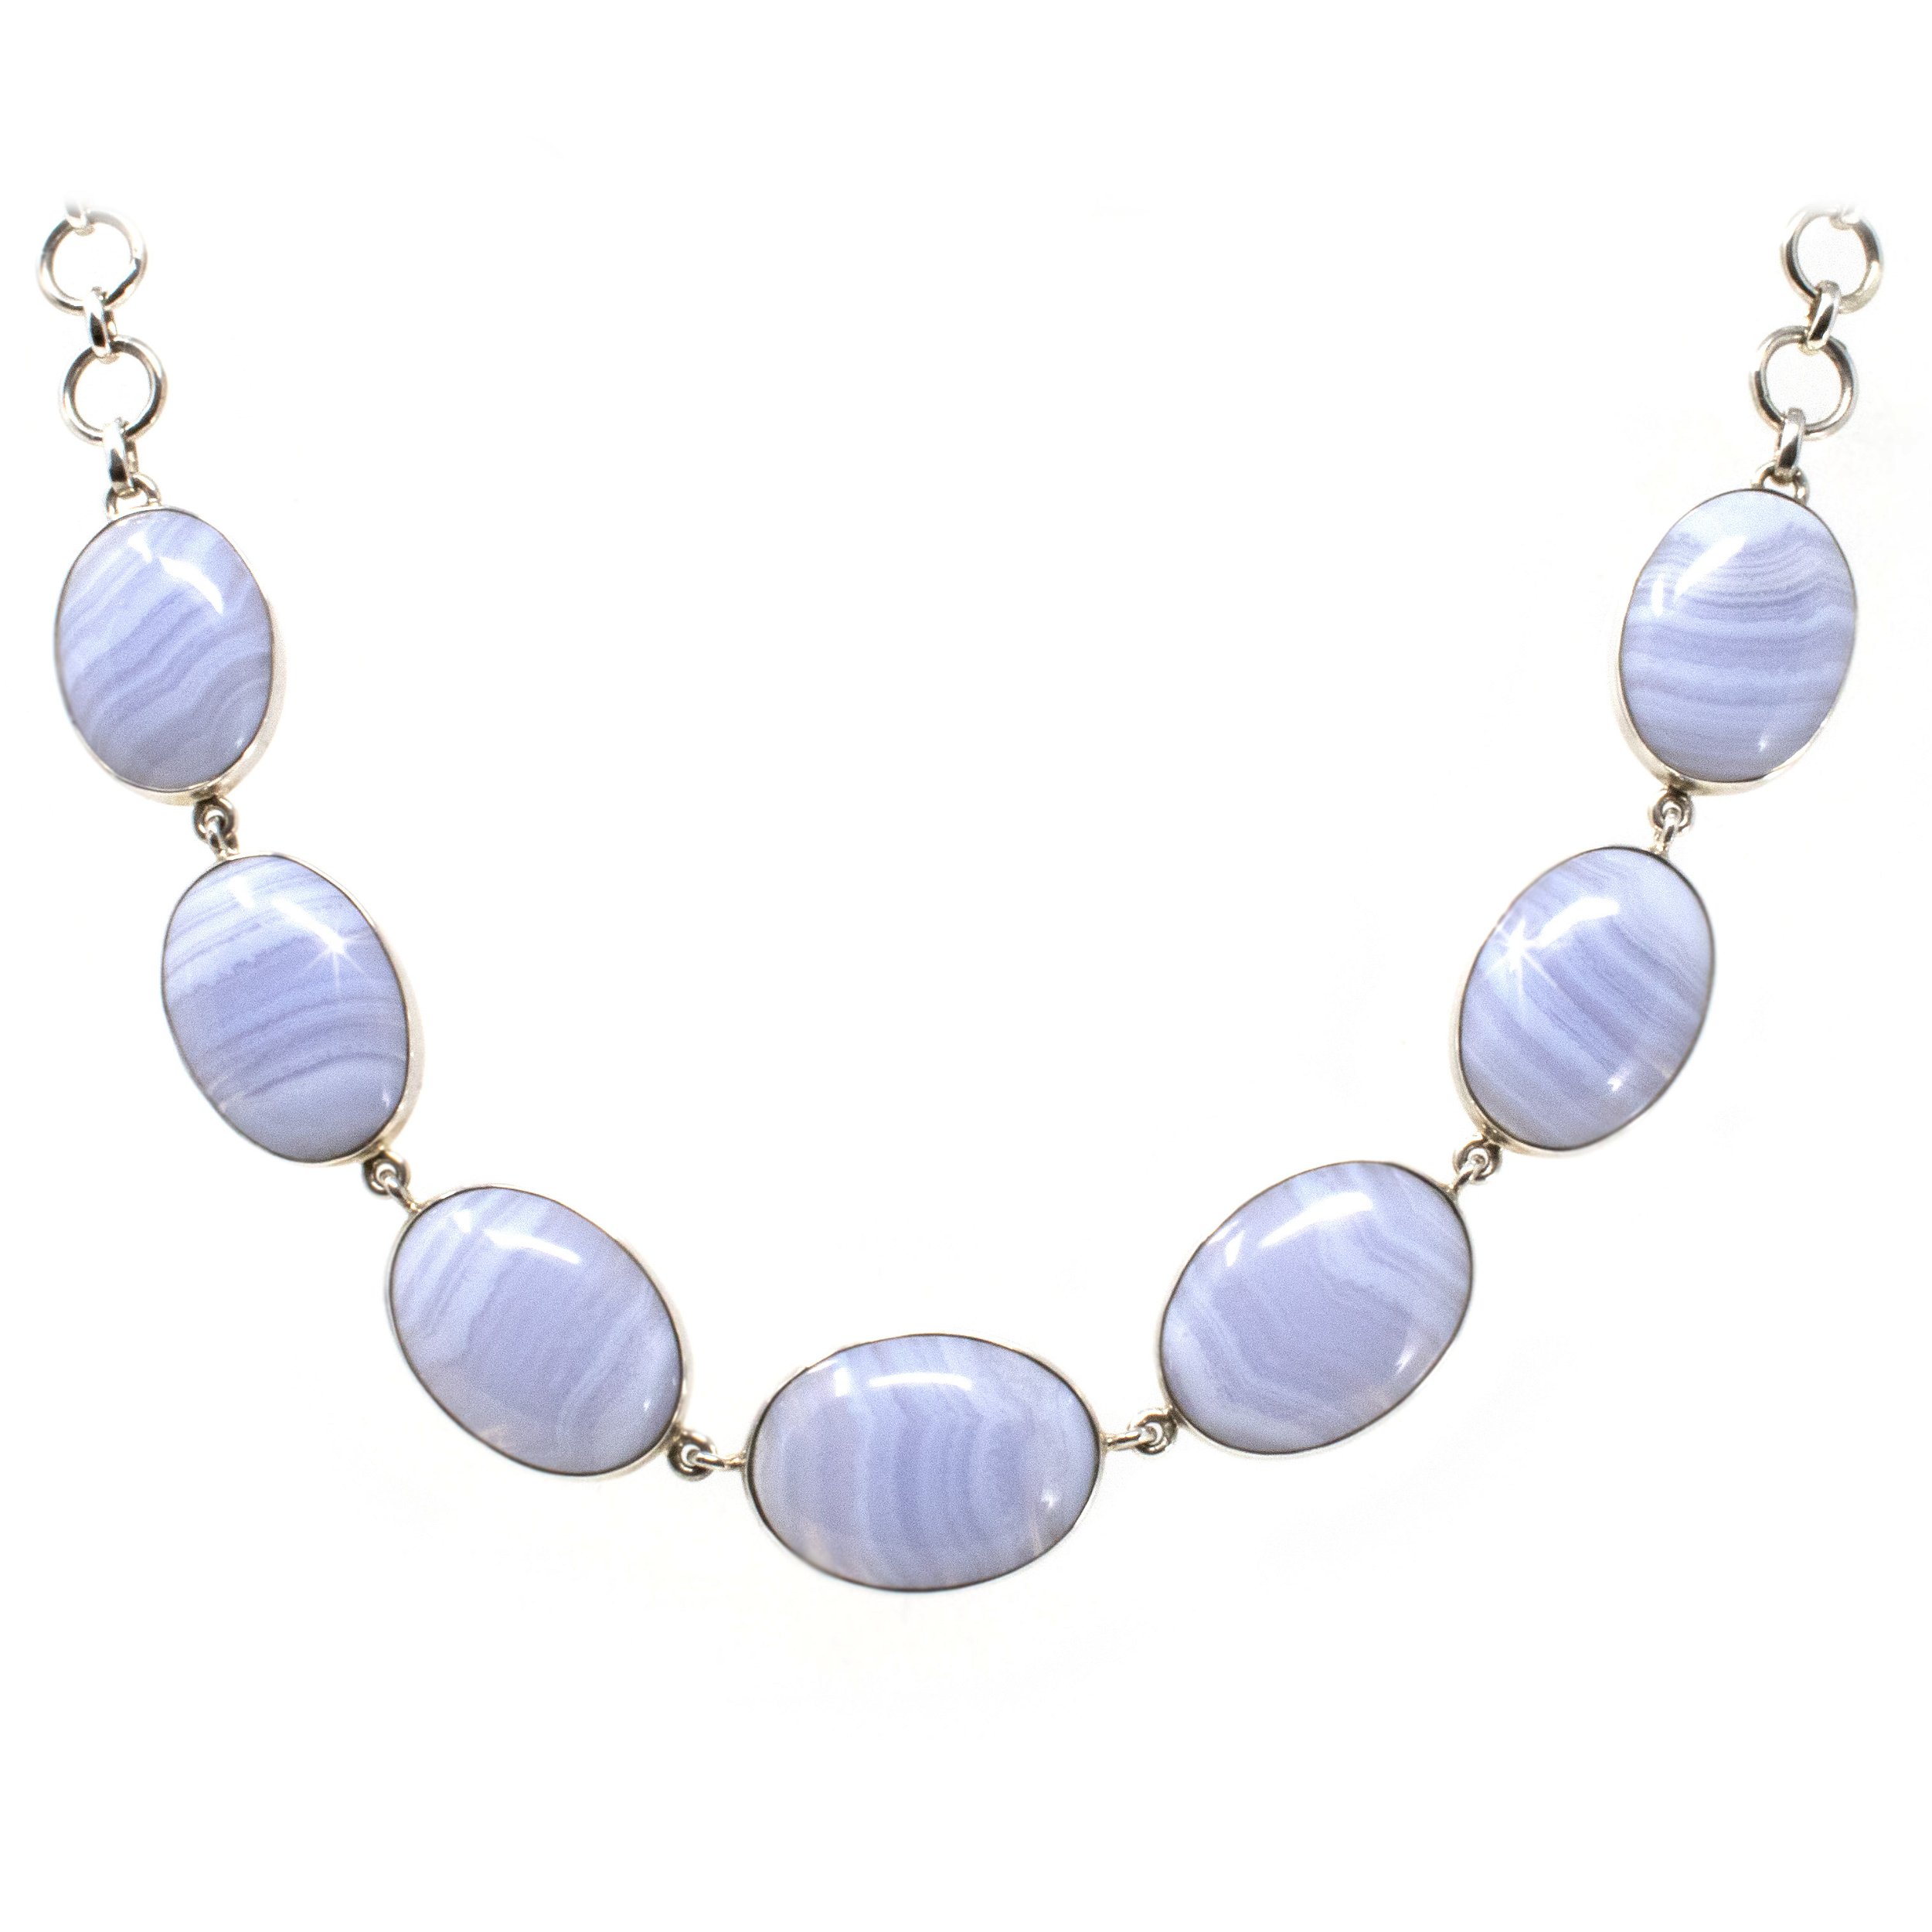 Blue Lace Agate Necklace - 7 Simple Oval Cabochons With Silver Bezels